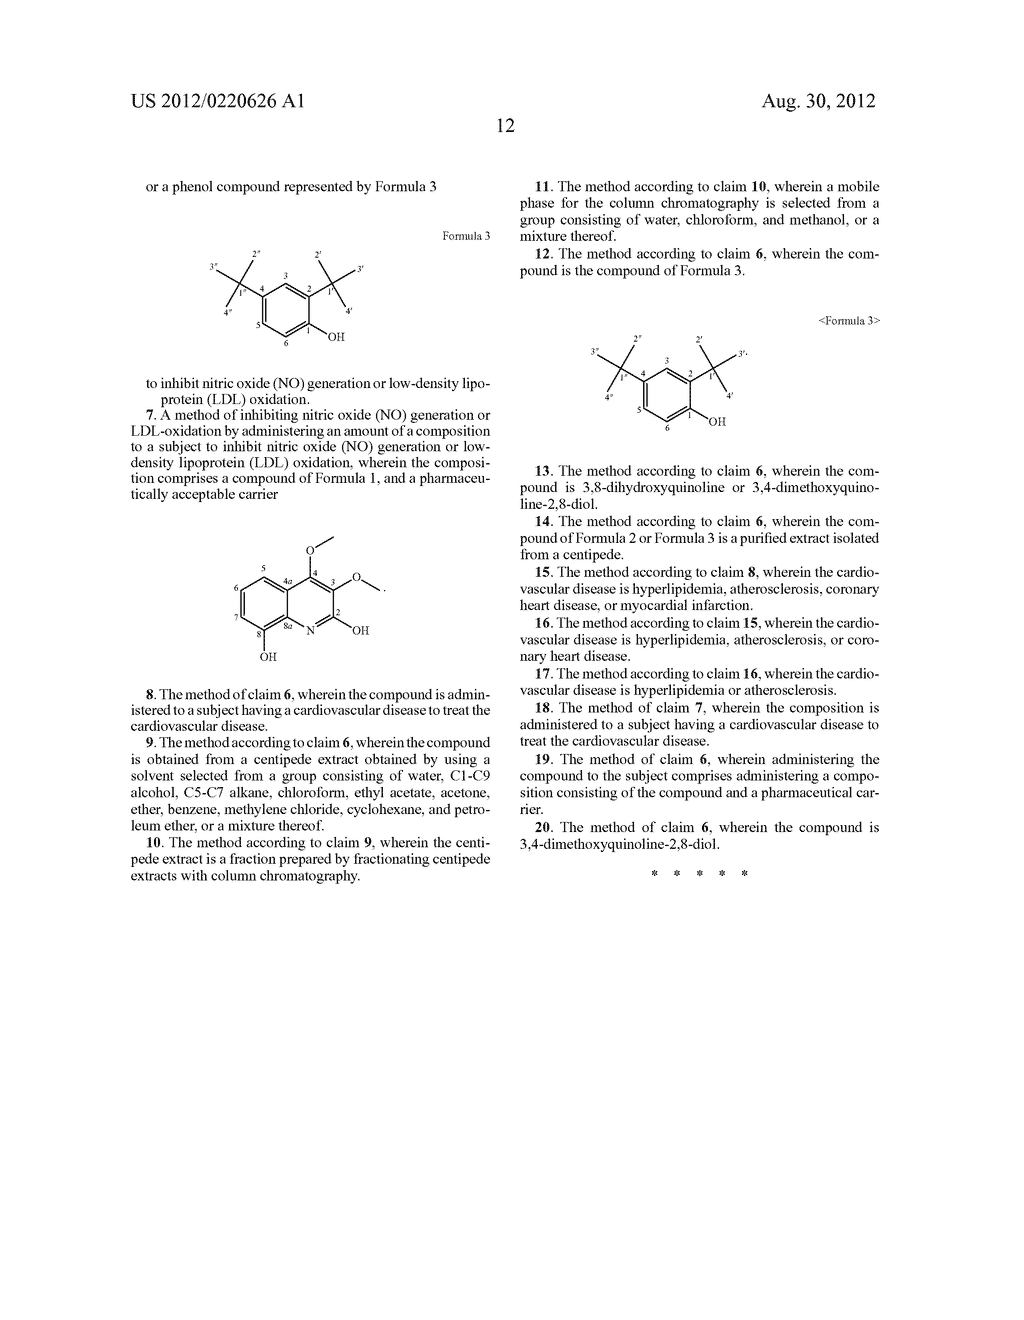 NOVEL QUINOLINE COMPOUND, AND COMPOSITION CONTAINING CENTIPEDE EXTRACT OR     COMPOUNDS ISOLATED THEREFROM FOR PREVENTION AND TREATMENT OF     CARDIOVASCULAR DISEASE - diagram, schematic, and image 14